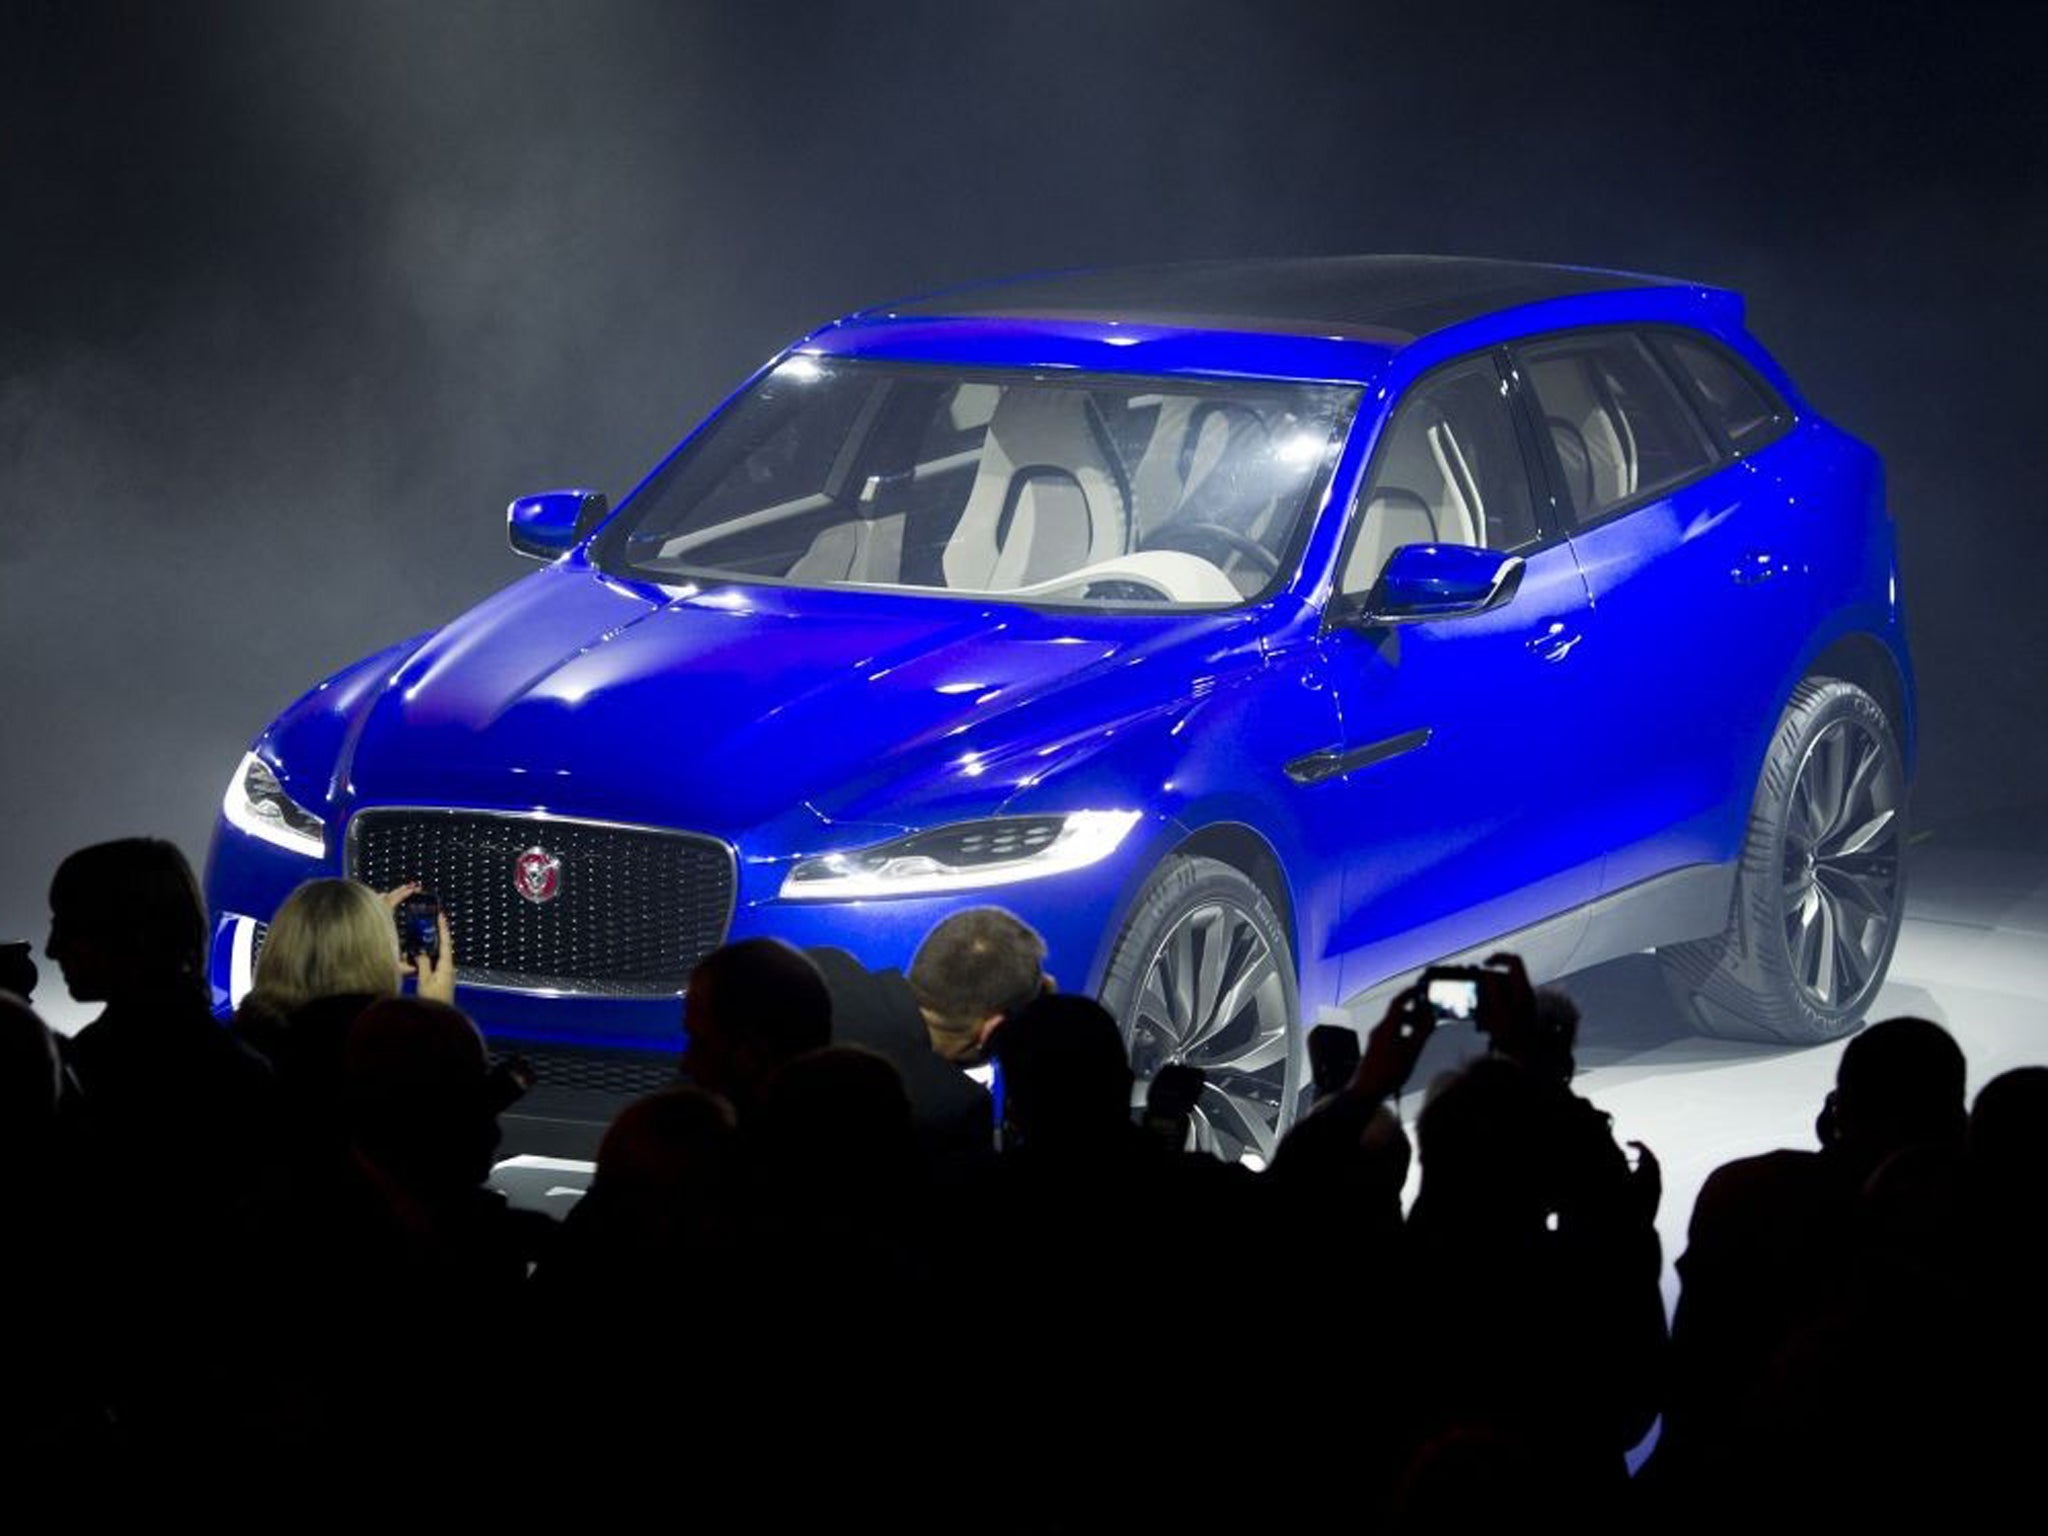 Jaguar showcases its design concept of the C-X17 crossover vehicle at the Frankfurt Motor Show